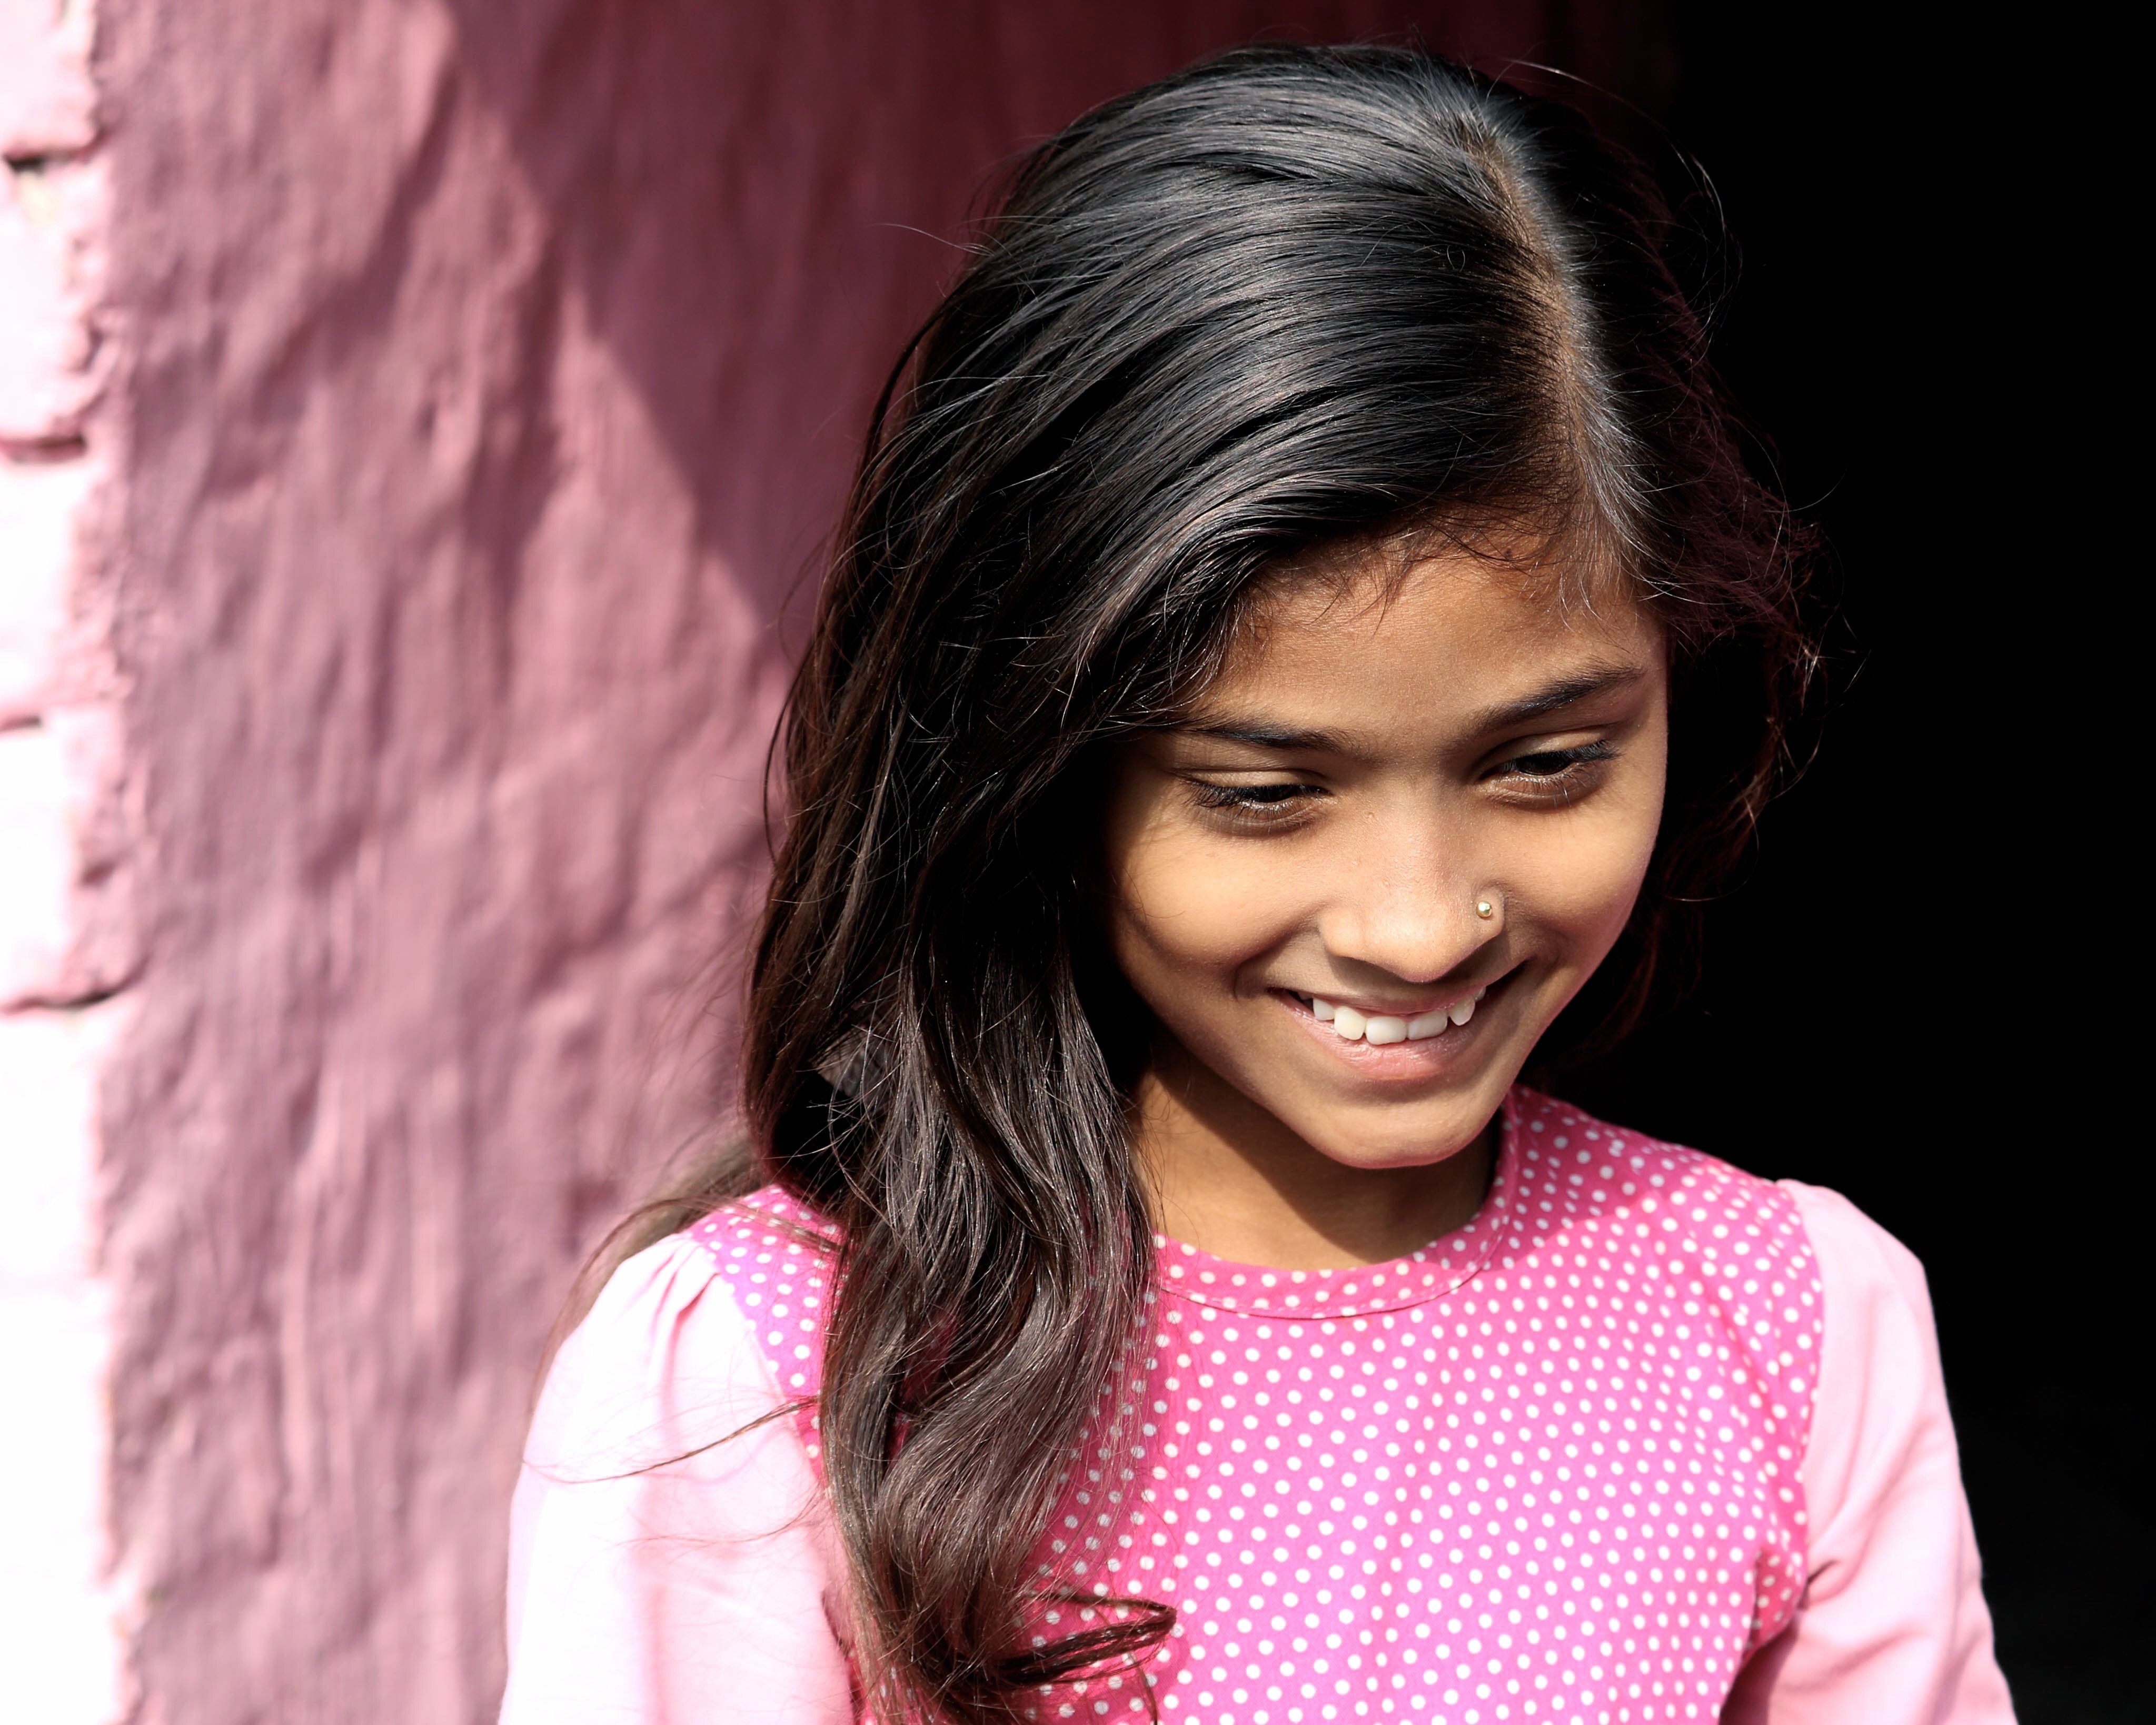 4095x3276 #youth, #indian, #natural, #kid, #body, #blonde, #healthy, #laughing, #laugh, #outdoor, #girl, #childhood, #child, #pink, # smile, #person, #Free , #fresh, #smiling, #india, #lying. Mocah HD Wallpaper